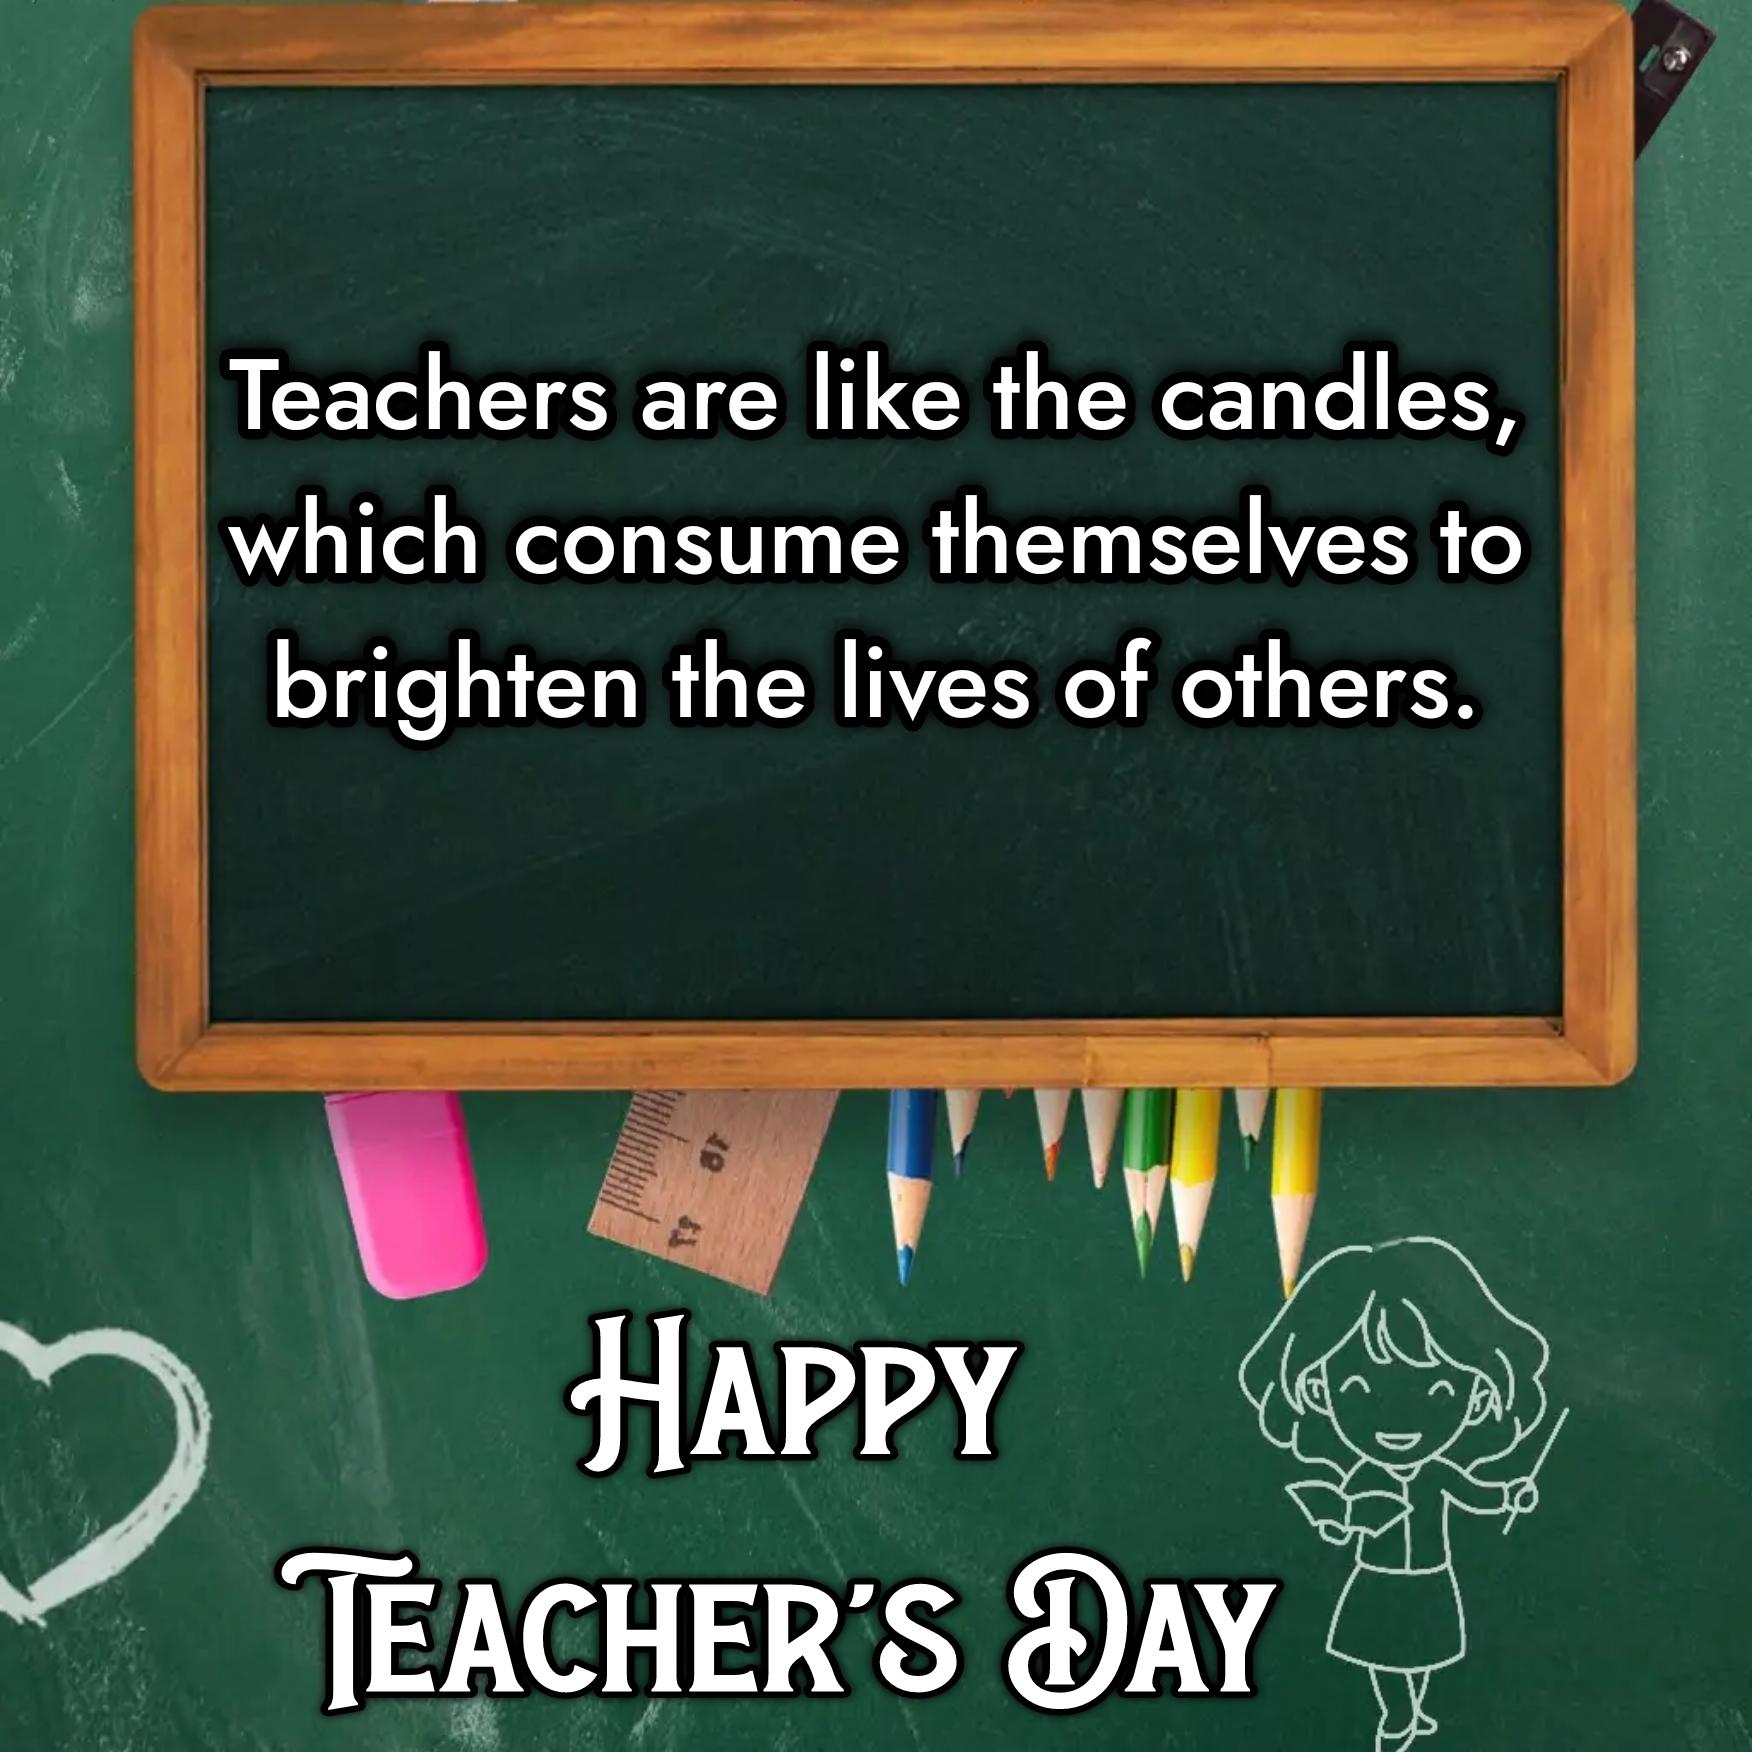 Teachers are like the candles